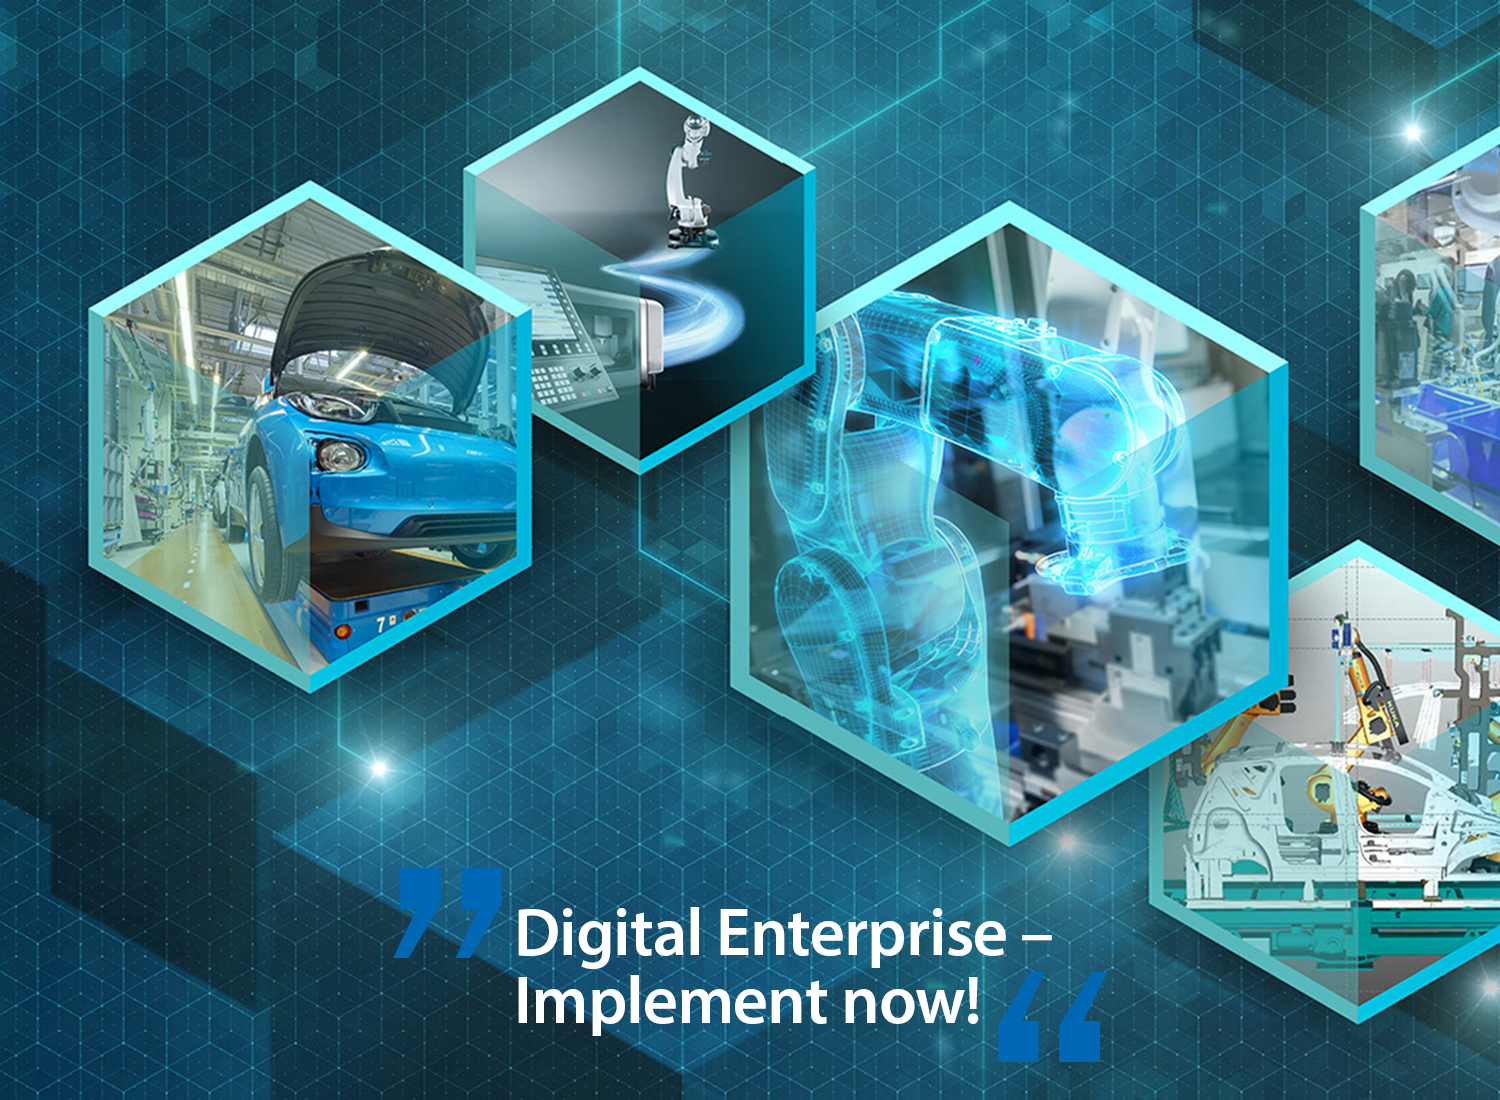 User-oriented solutions for the digital future of manufacturing